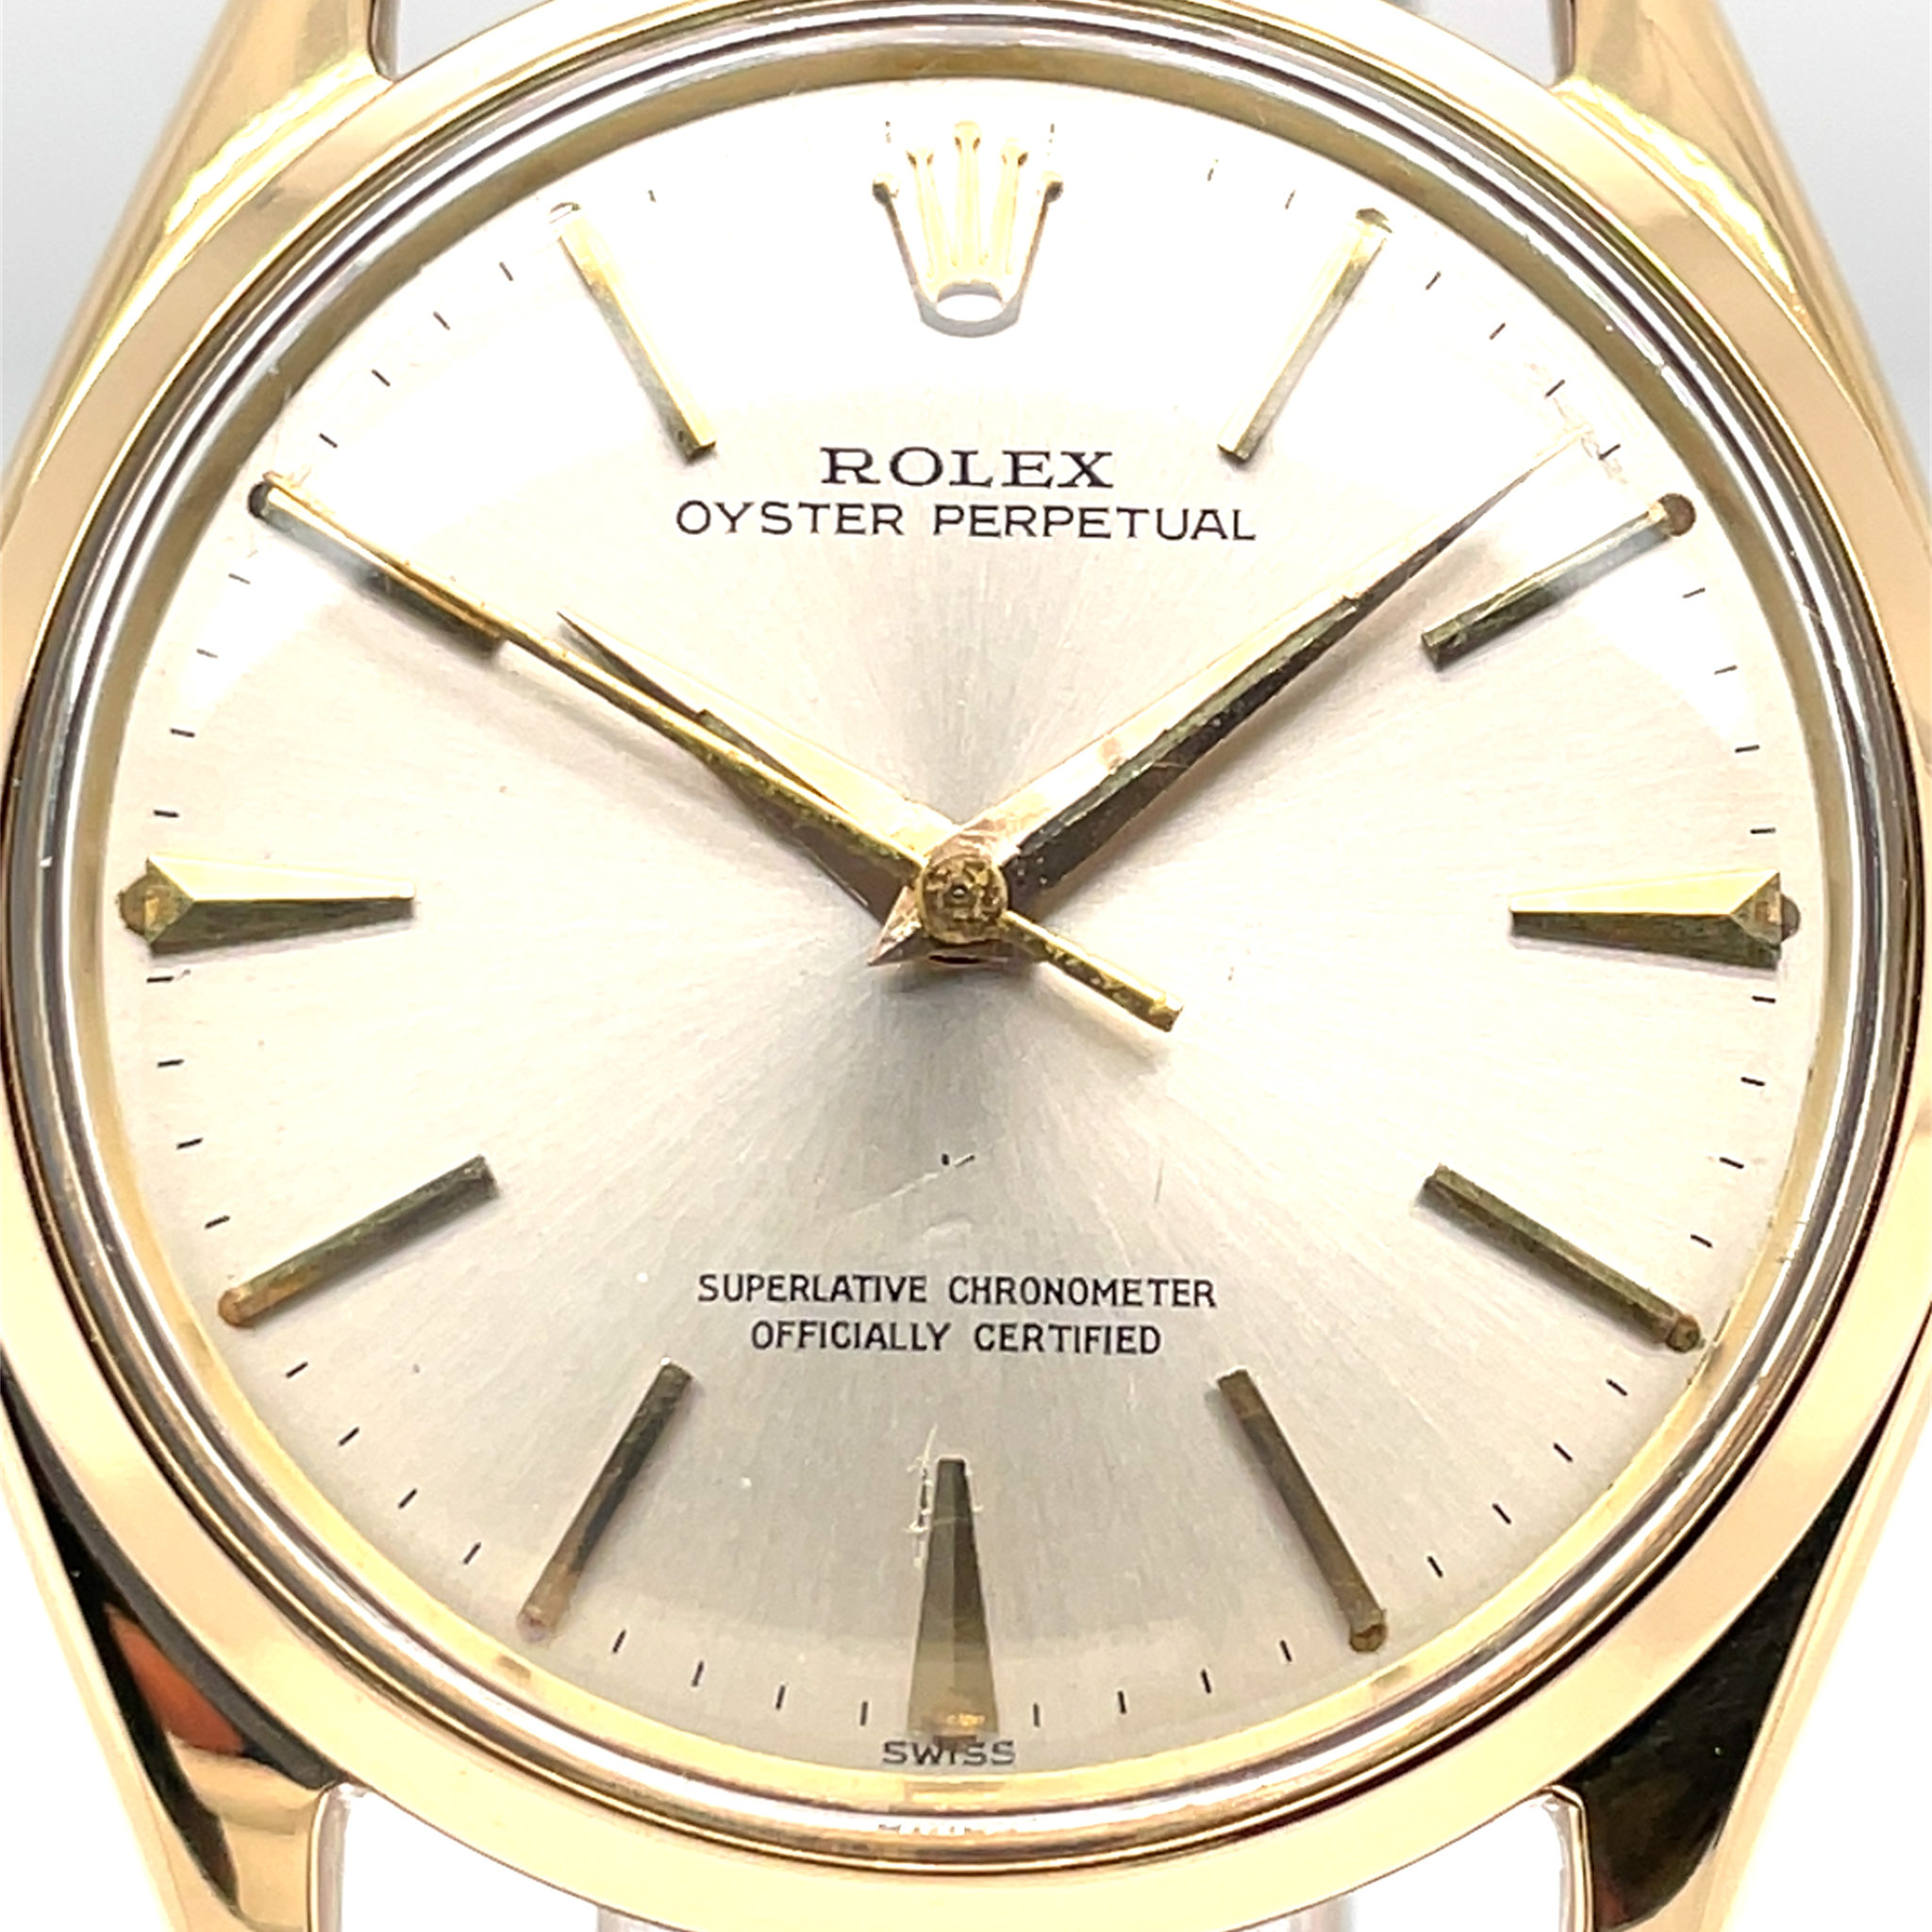 Rolex Oyster Perpetual Chronometer 34mm Ref. 1005/1002 Gold 18K 1950s +new Rolex Box